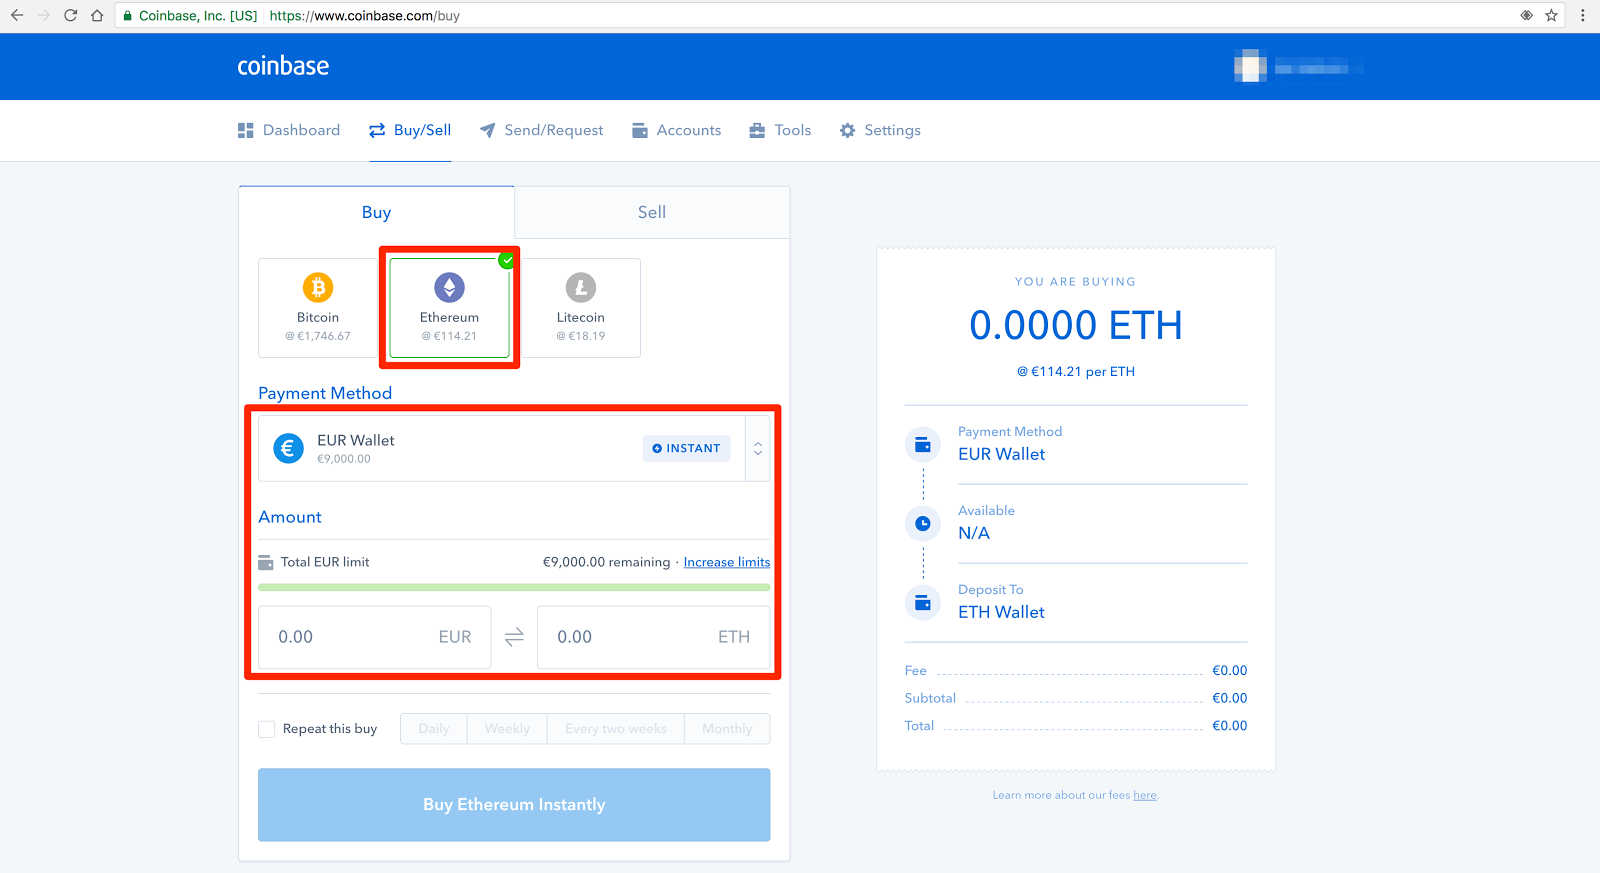 how to use bitcoin to buy ethereum on coinbase